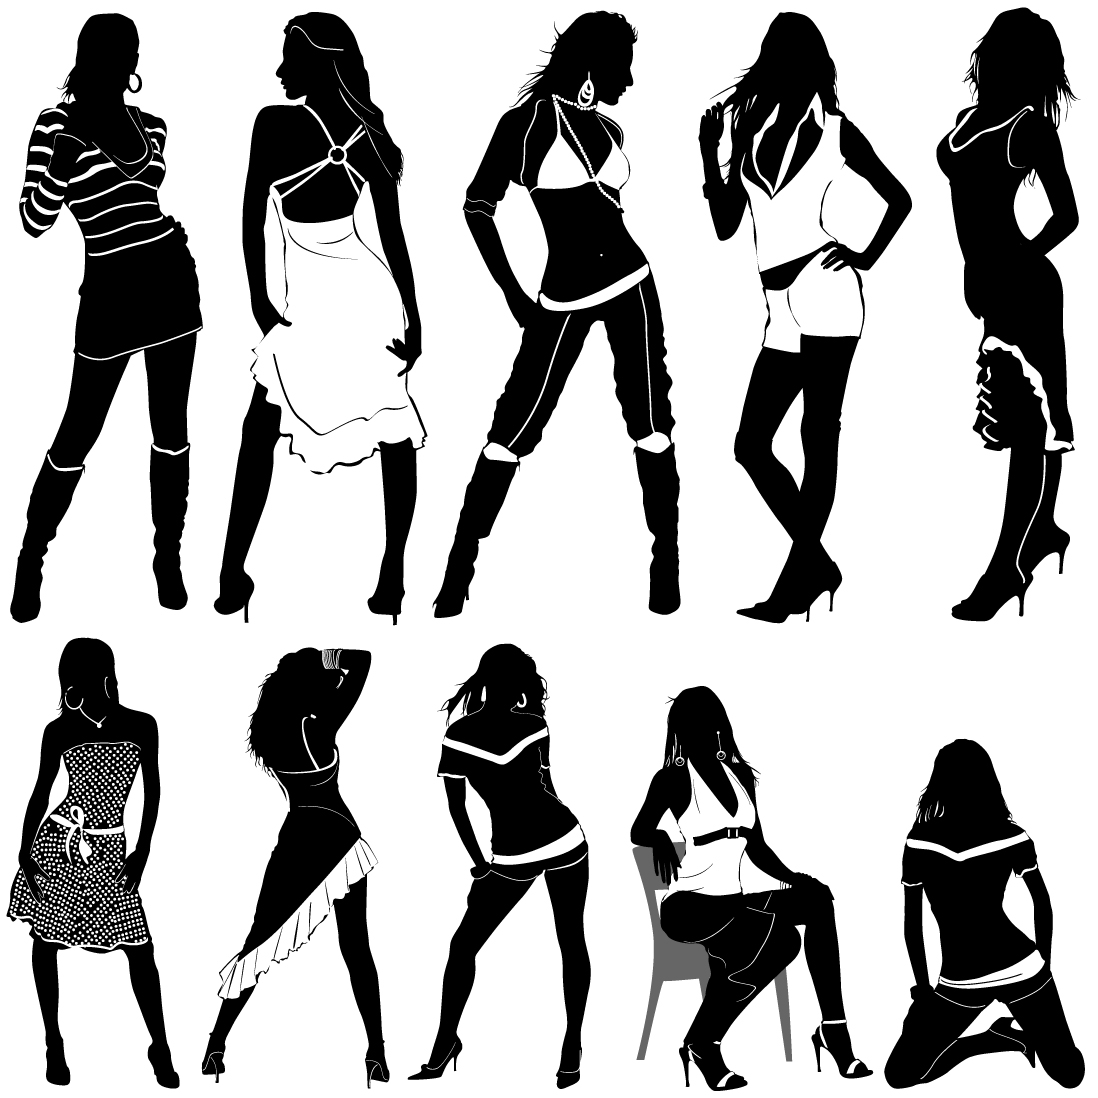 Clip Arts Related To : silhouette clip art people. view all people-clipart)...